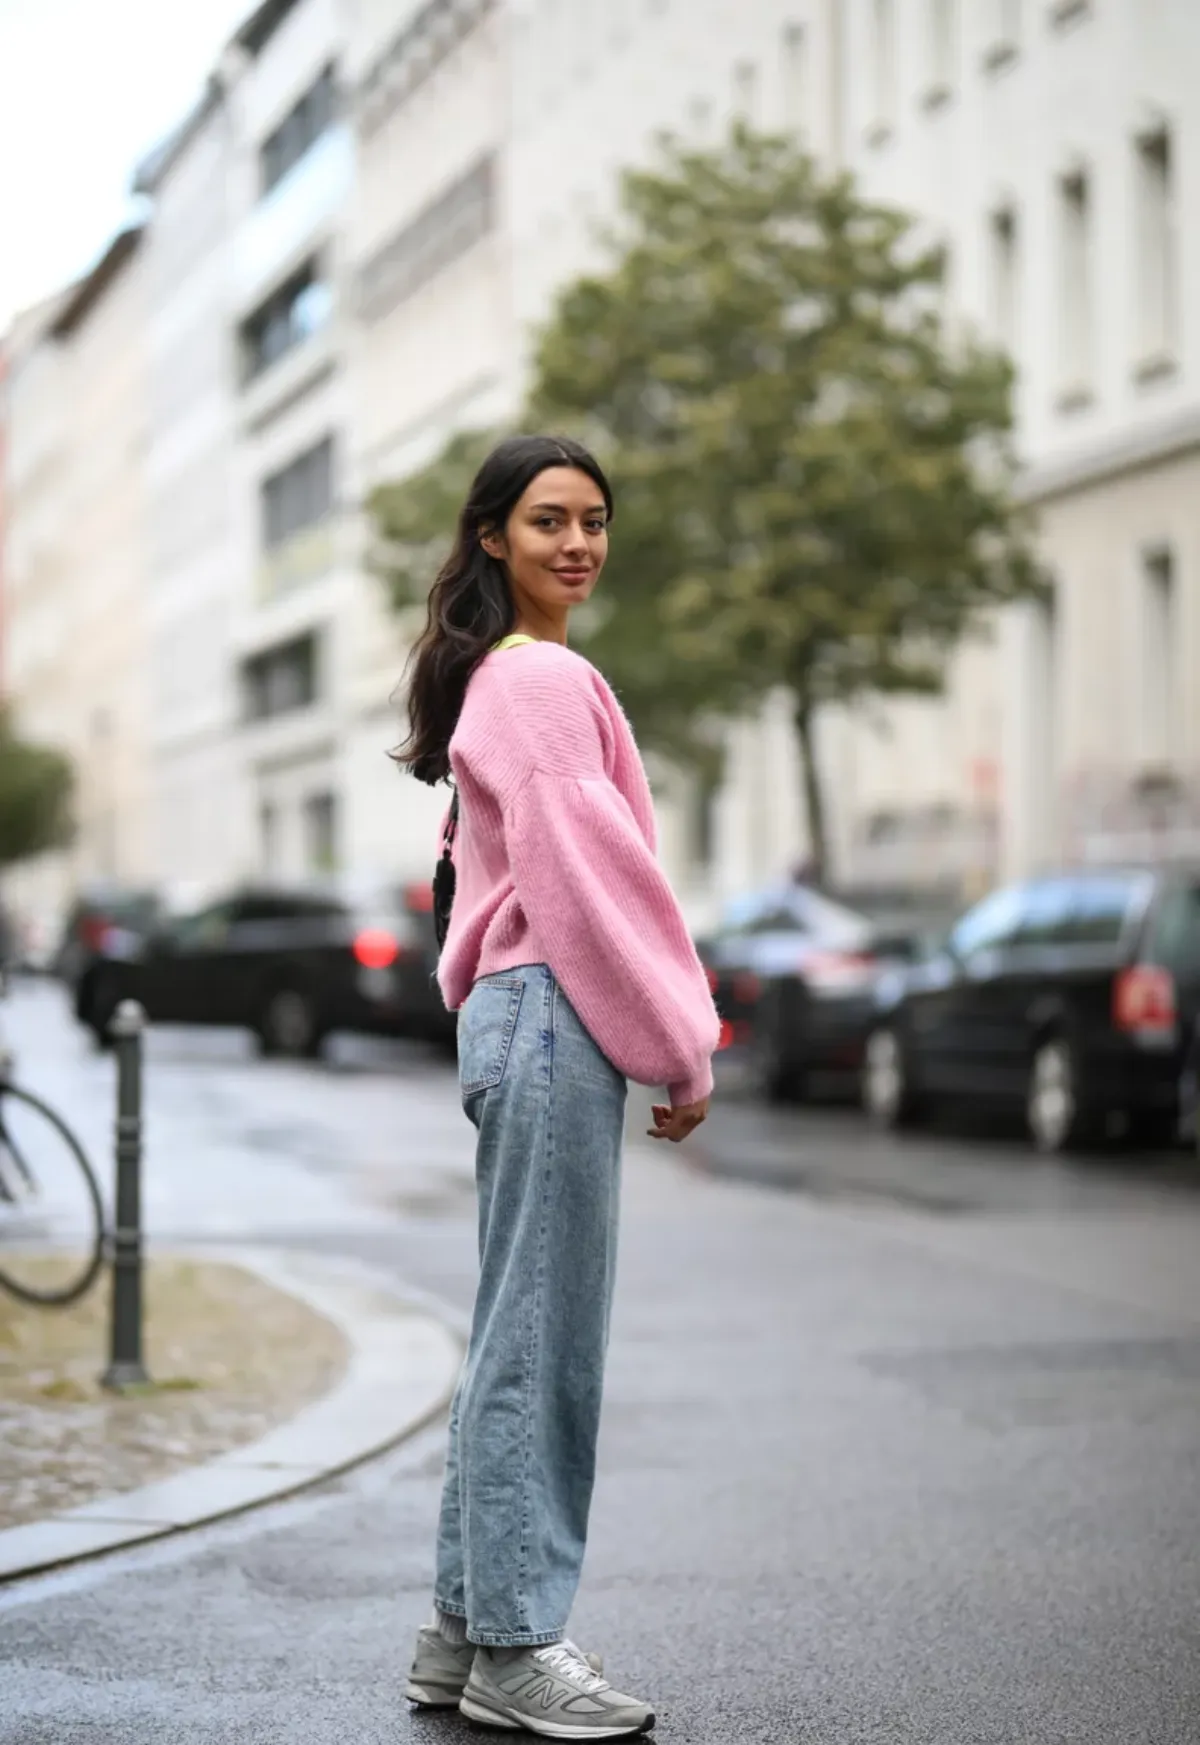 lockere jeans und rosafarbener pullover herbst outfit